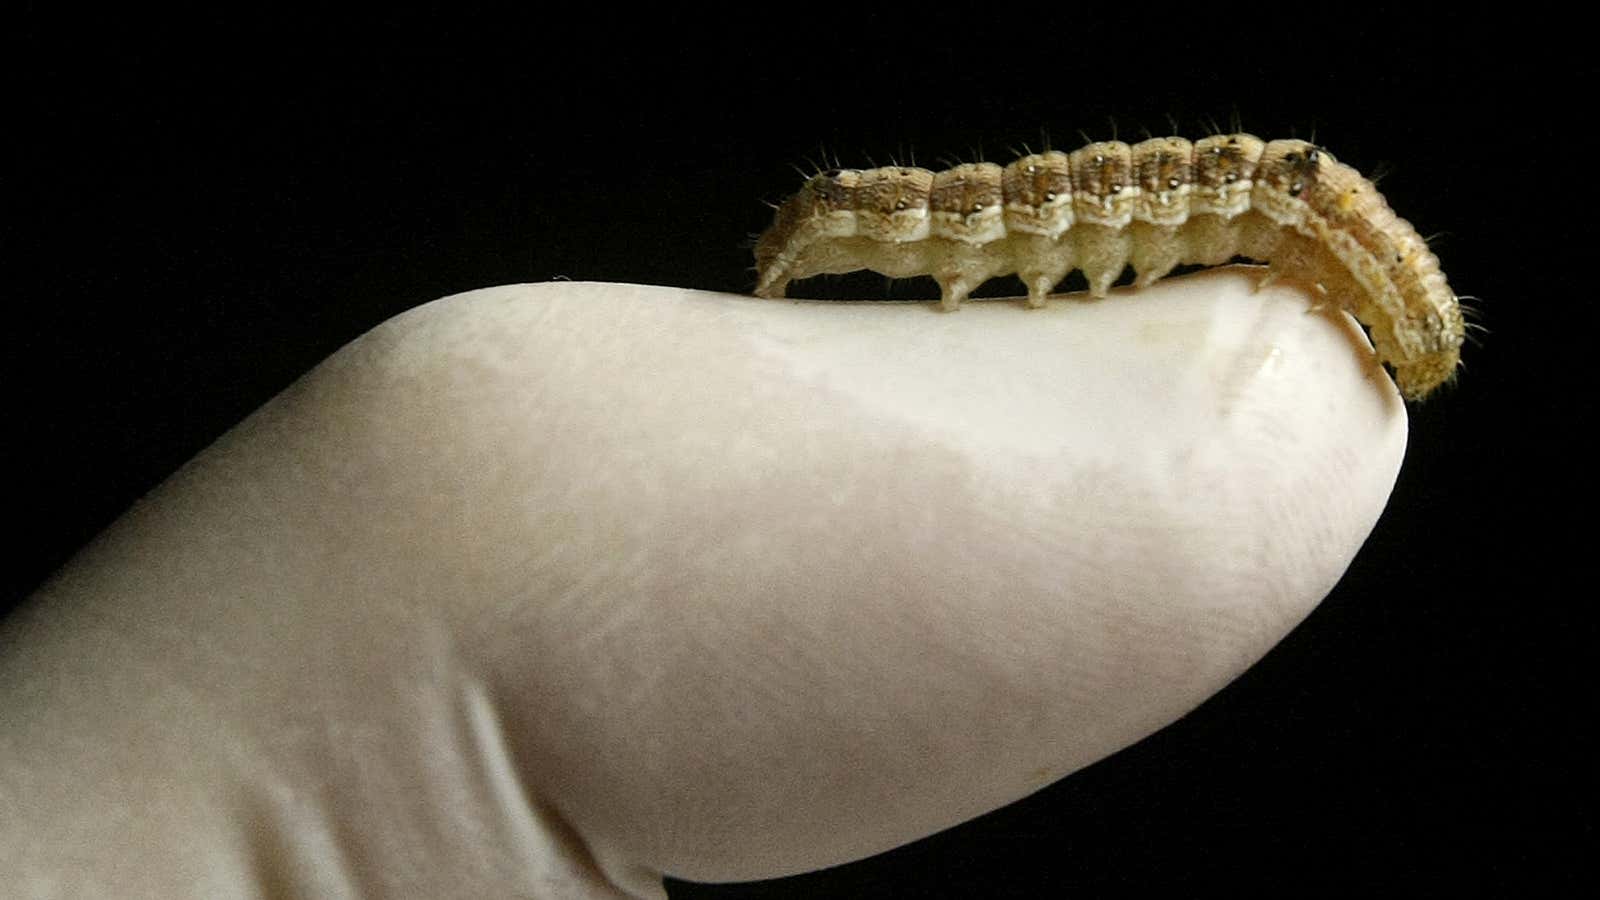 Monsanto’s big opportunity is this caterpillar and its big appetite.